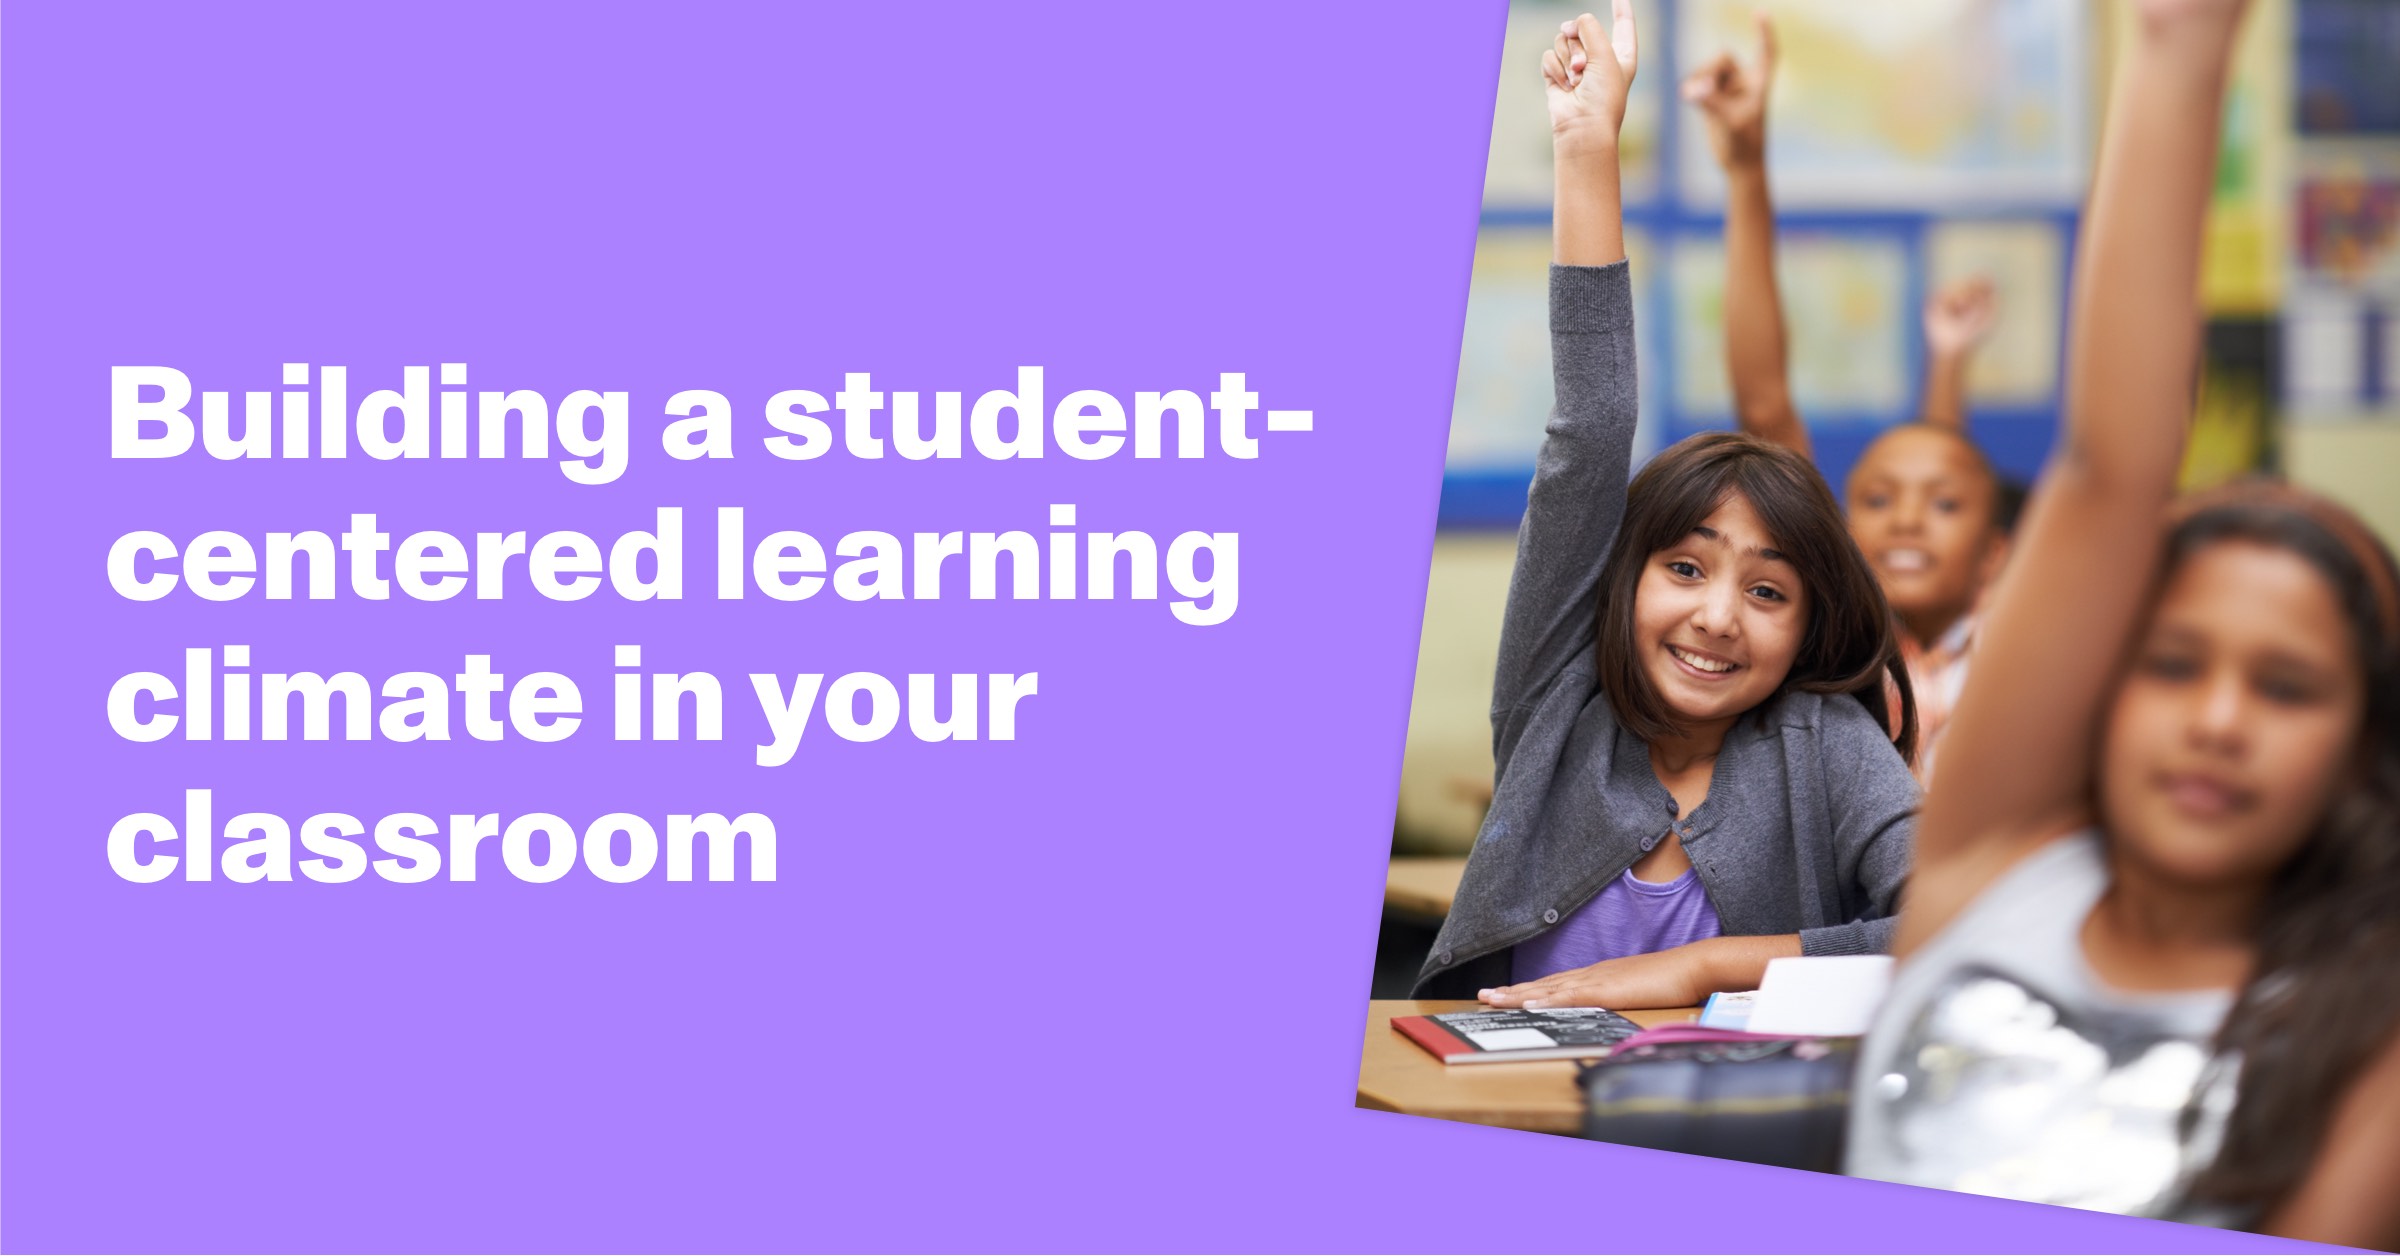 Building a student-centered learning climate in your classroom